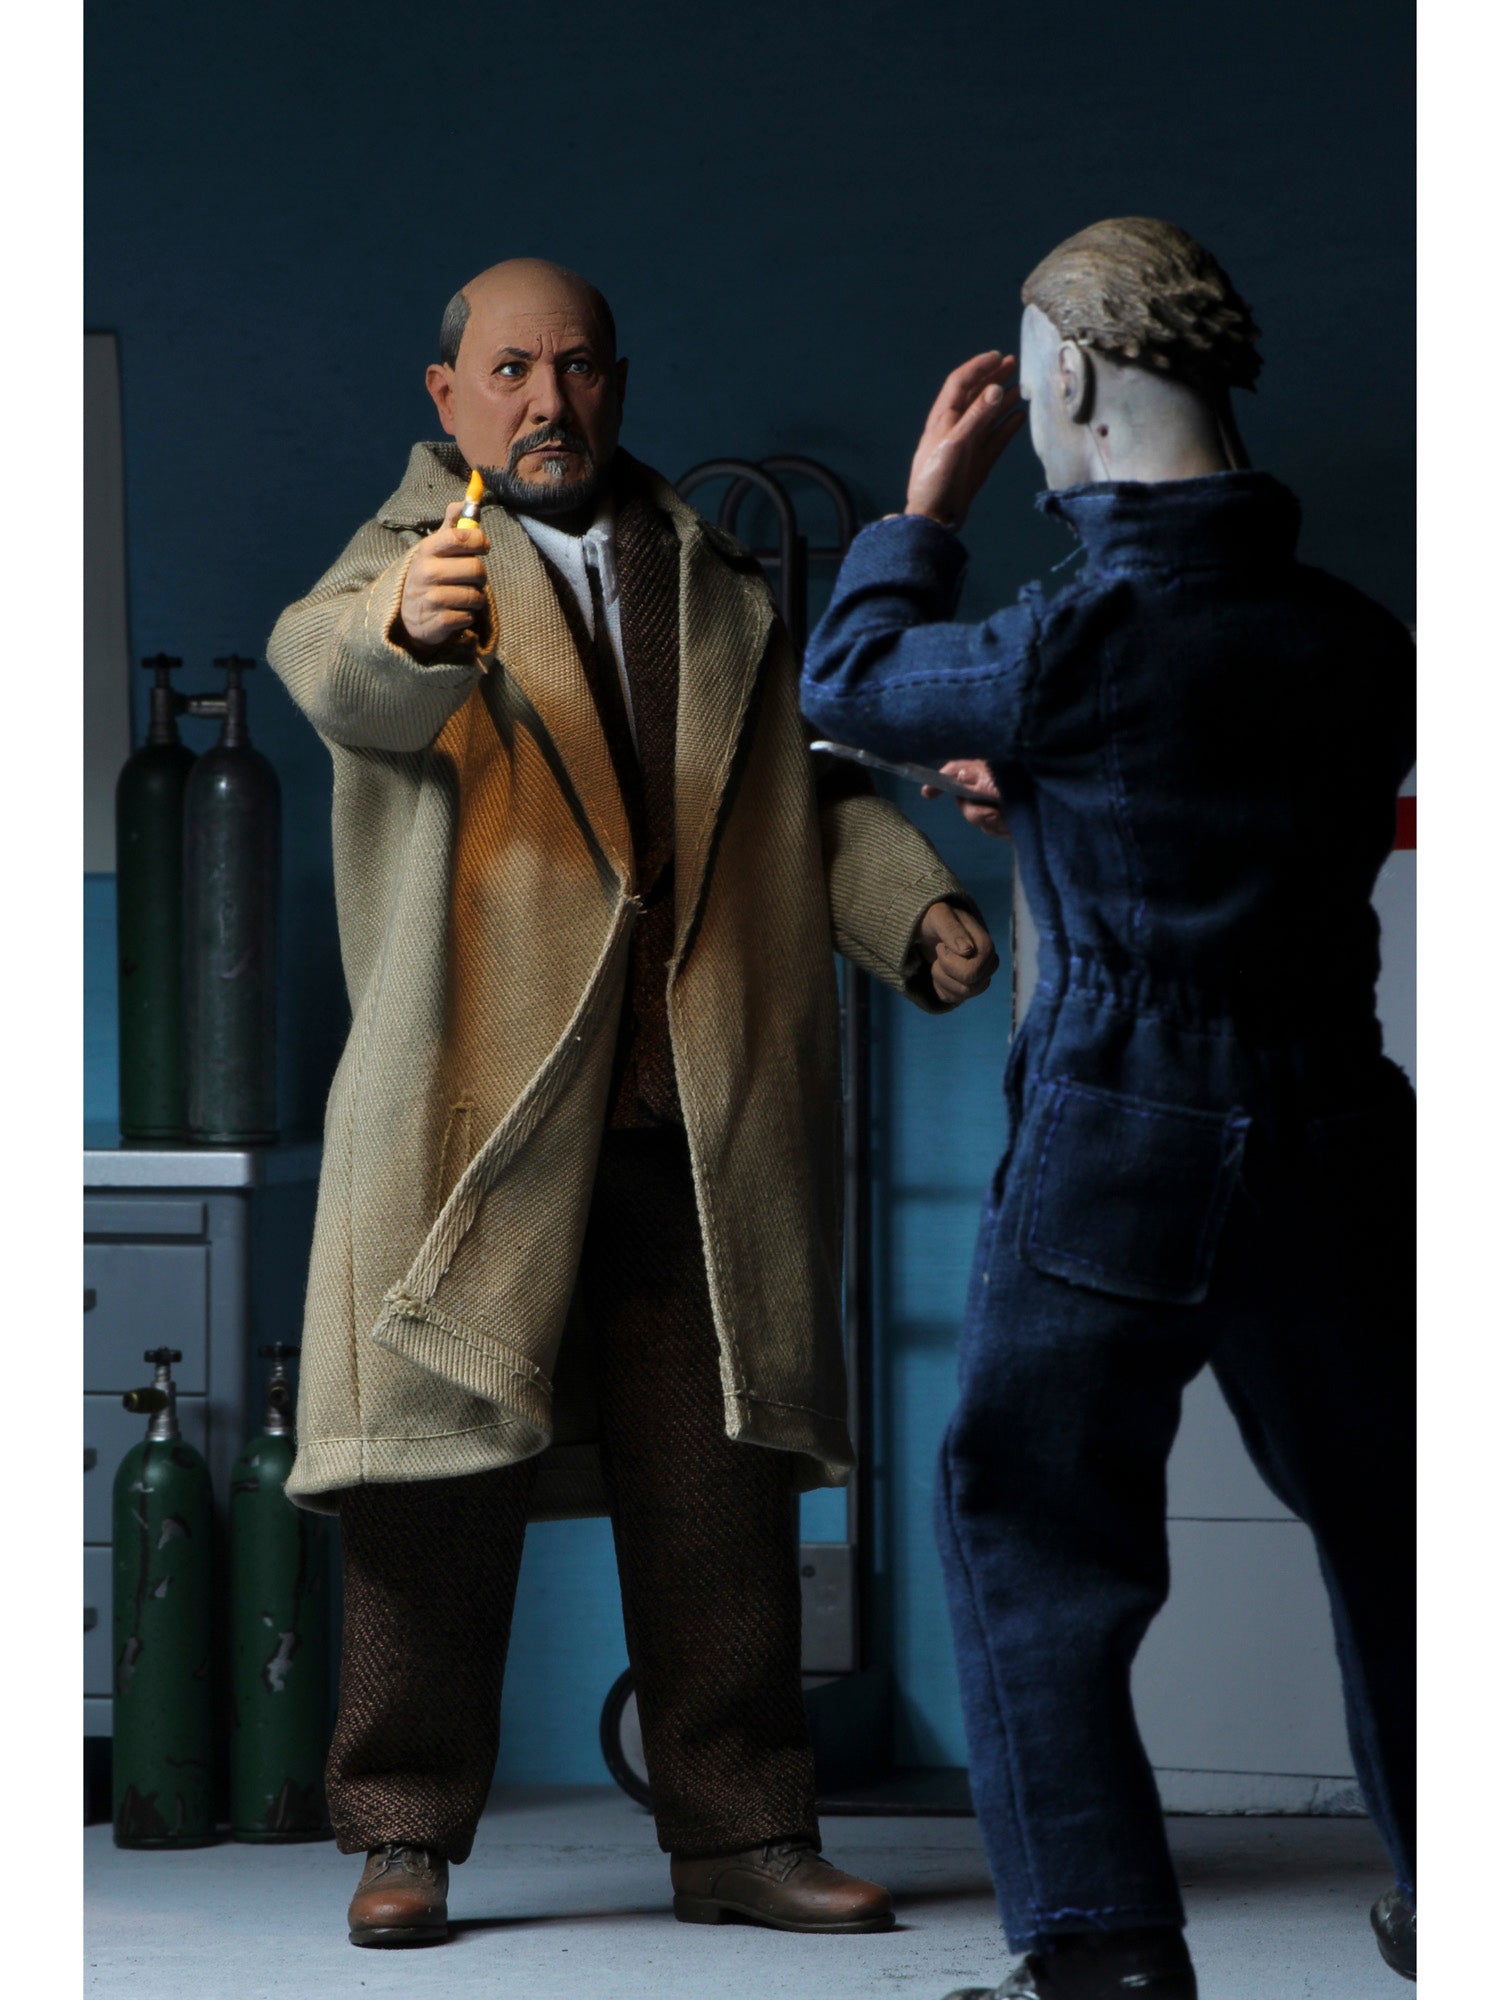 NECA - Halloween 2 (1981) - 8" Clothed Action Figure - Dr. Loomis and Laurie Strode 2 Pack - costumes.com